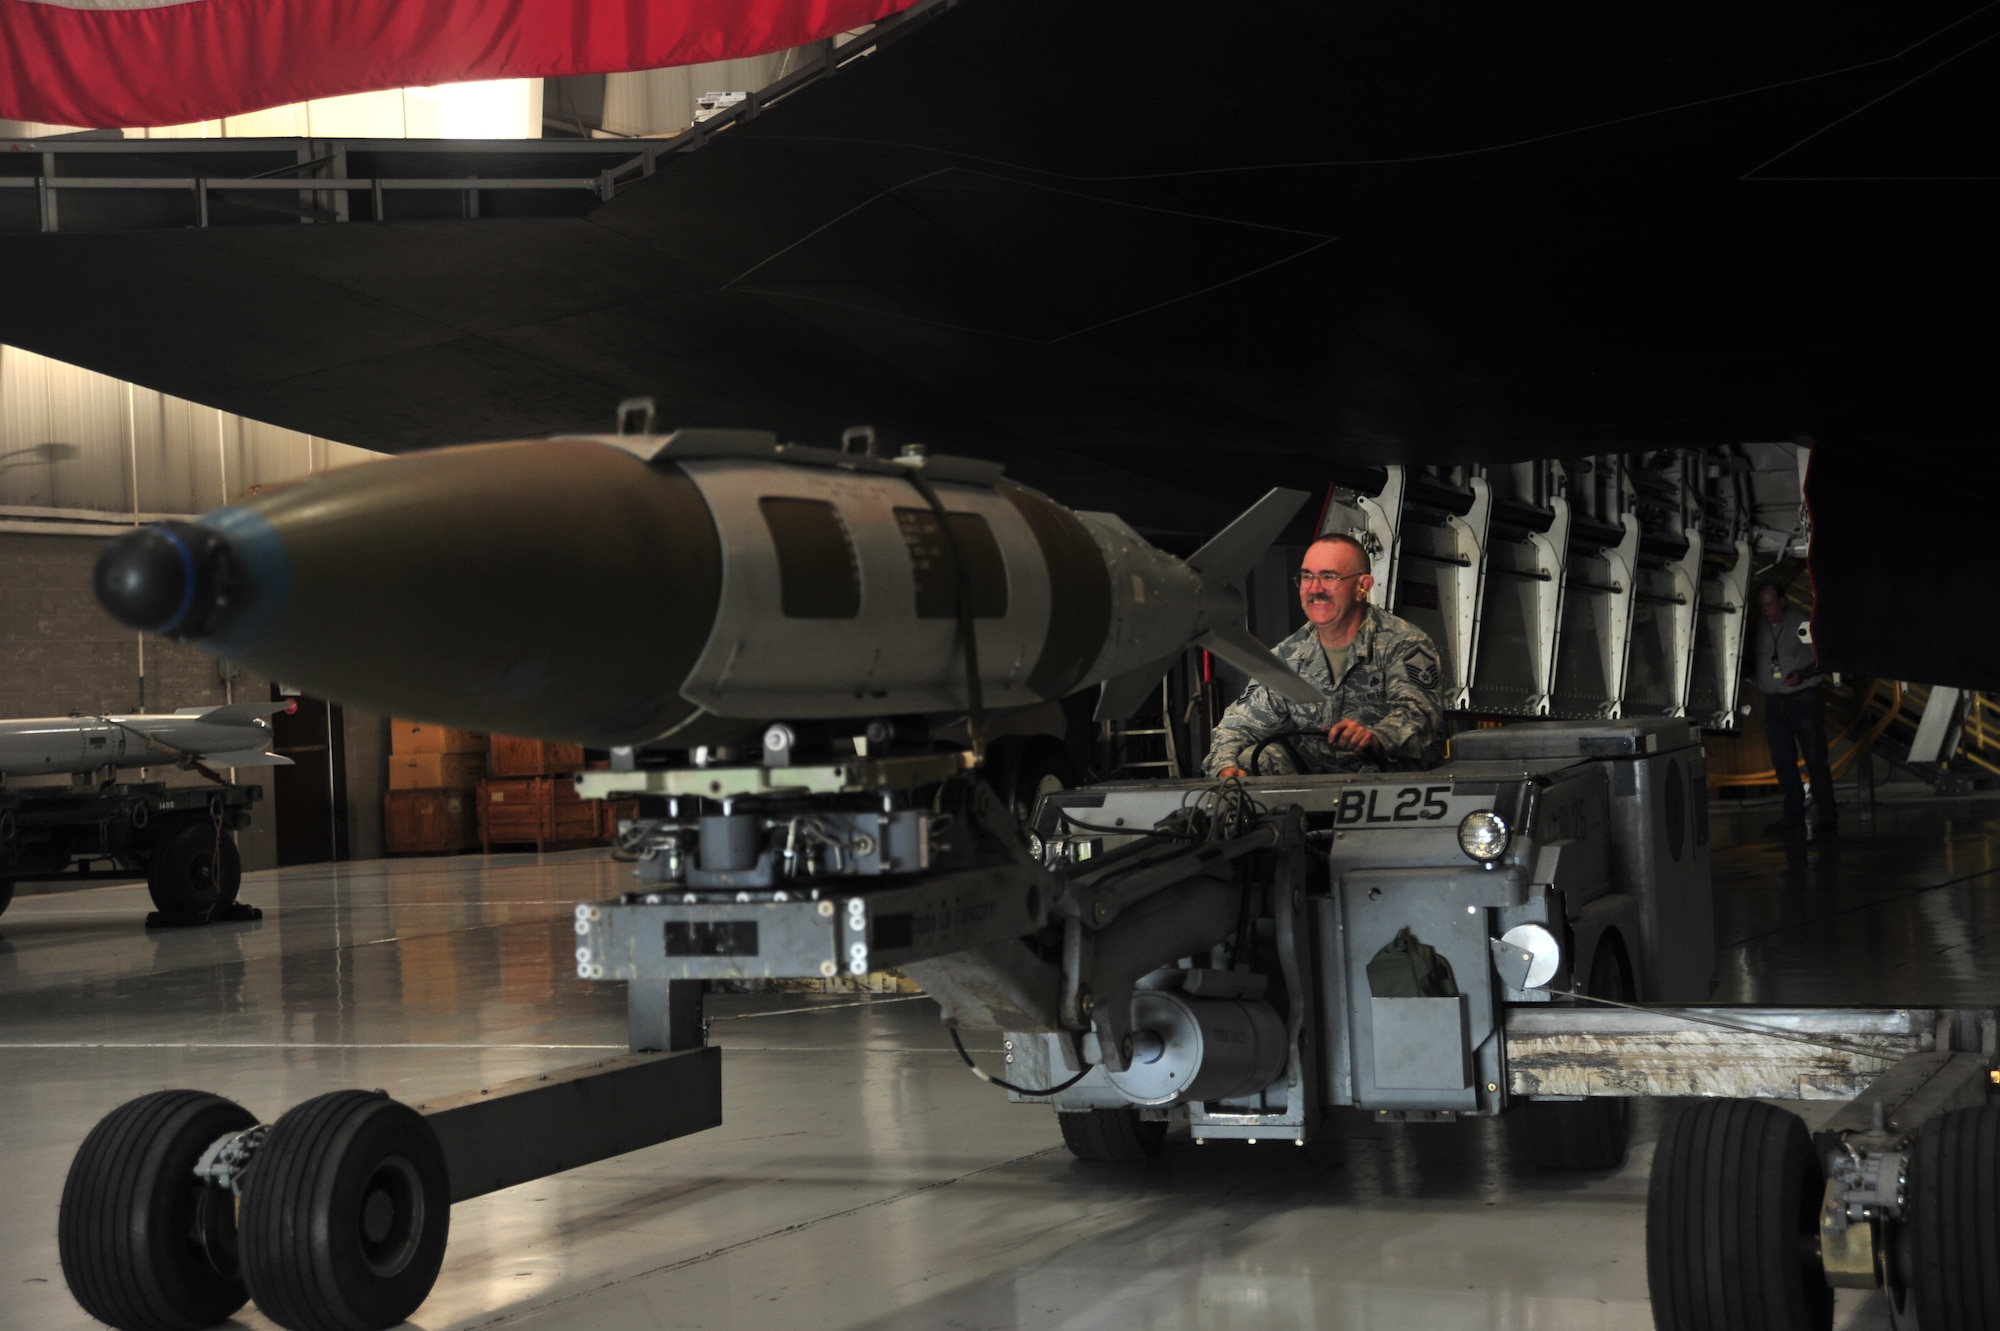 U.S. Air Force Master Sgt. Allen Anderson, an aircraft armament systems mechanic assigned to the 131st Aircraft Maintenance Squadron, operates an MHU-83 D/E jammer  during certification training at Whiteman Air Force Base, Mo., June 28, 2016. Anderson, after serving more than 20 years in the Air Force, decided to end his career how it began, as a weapons loader.  (U.S. Air Force photo by Senior Airman Jovan Banks)